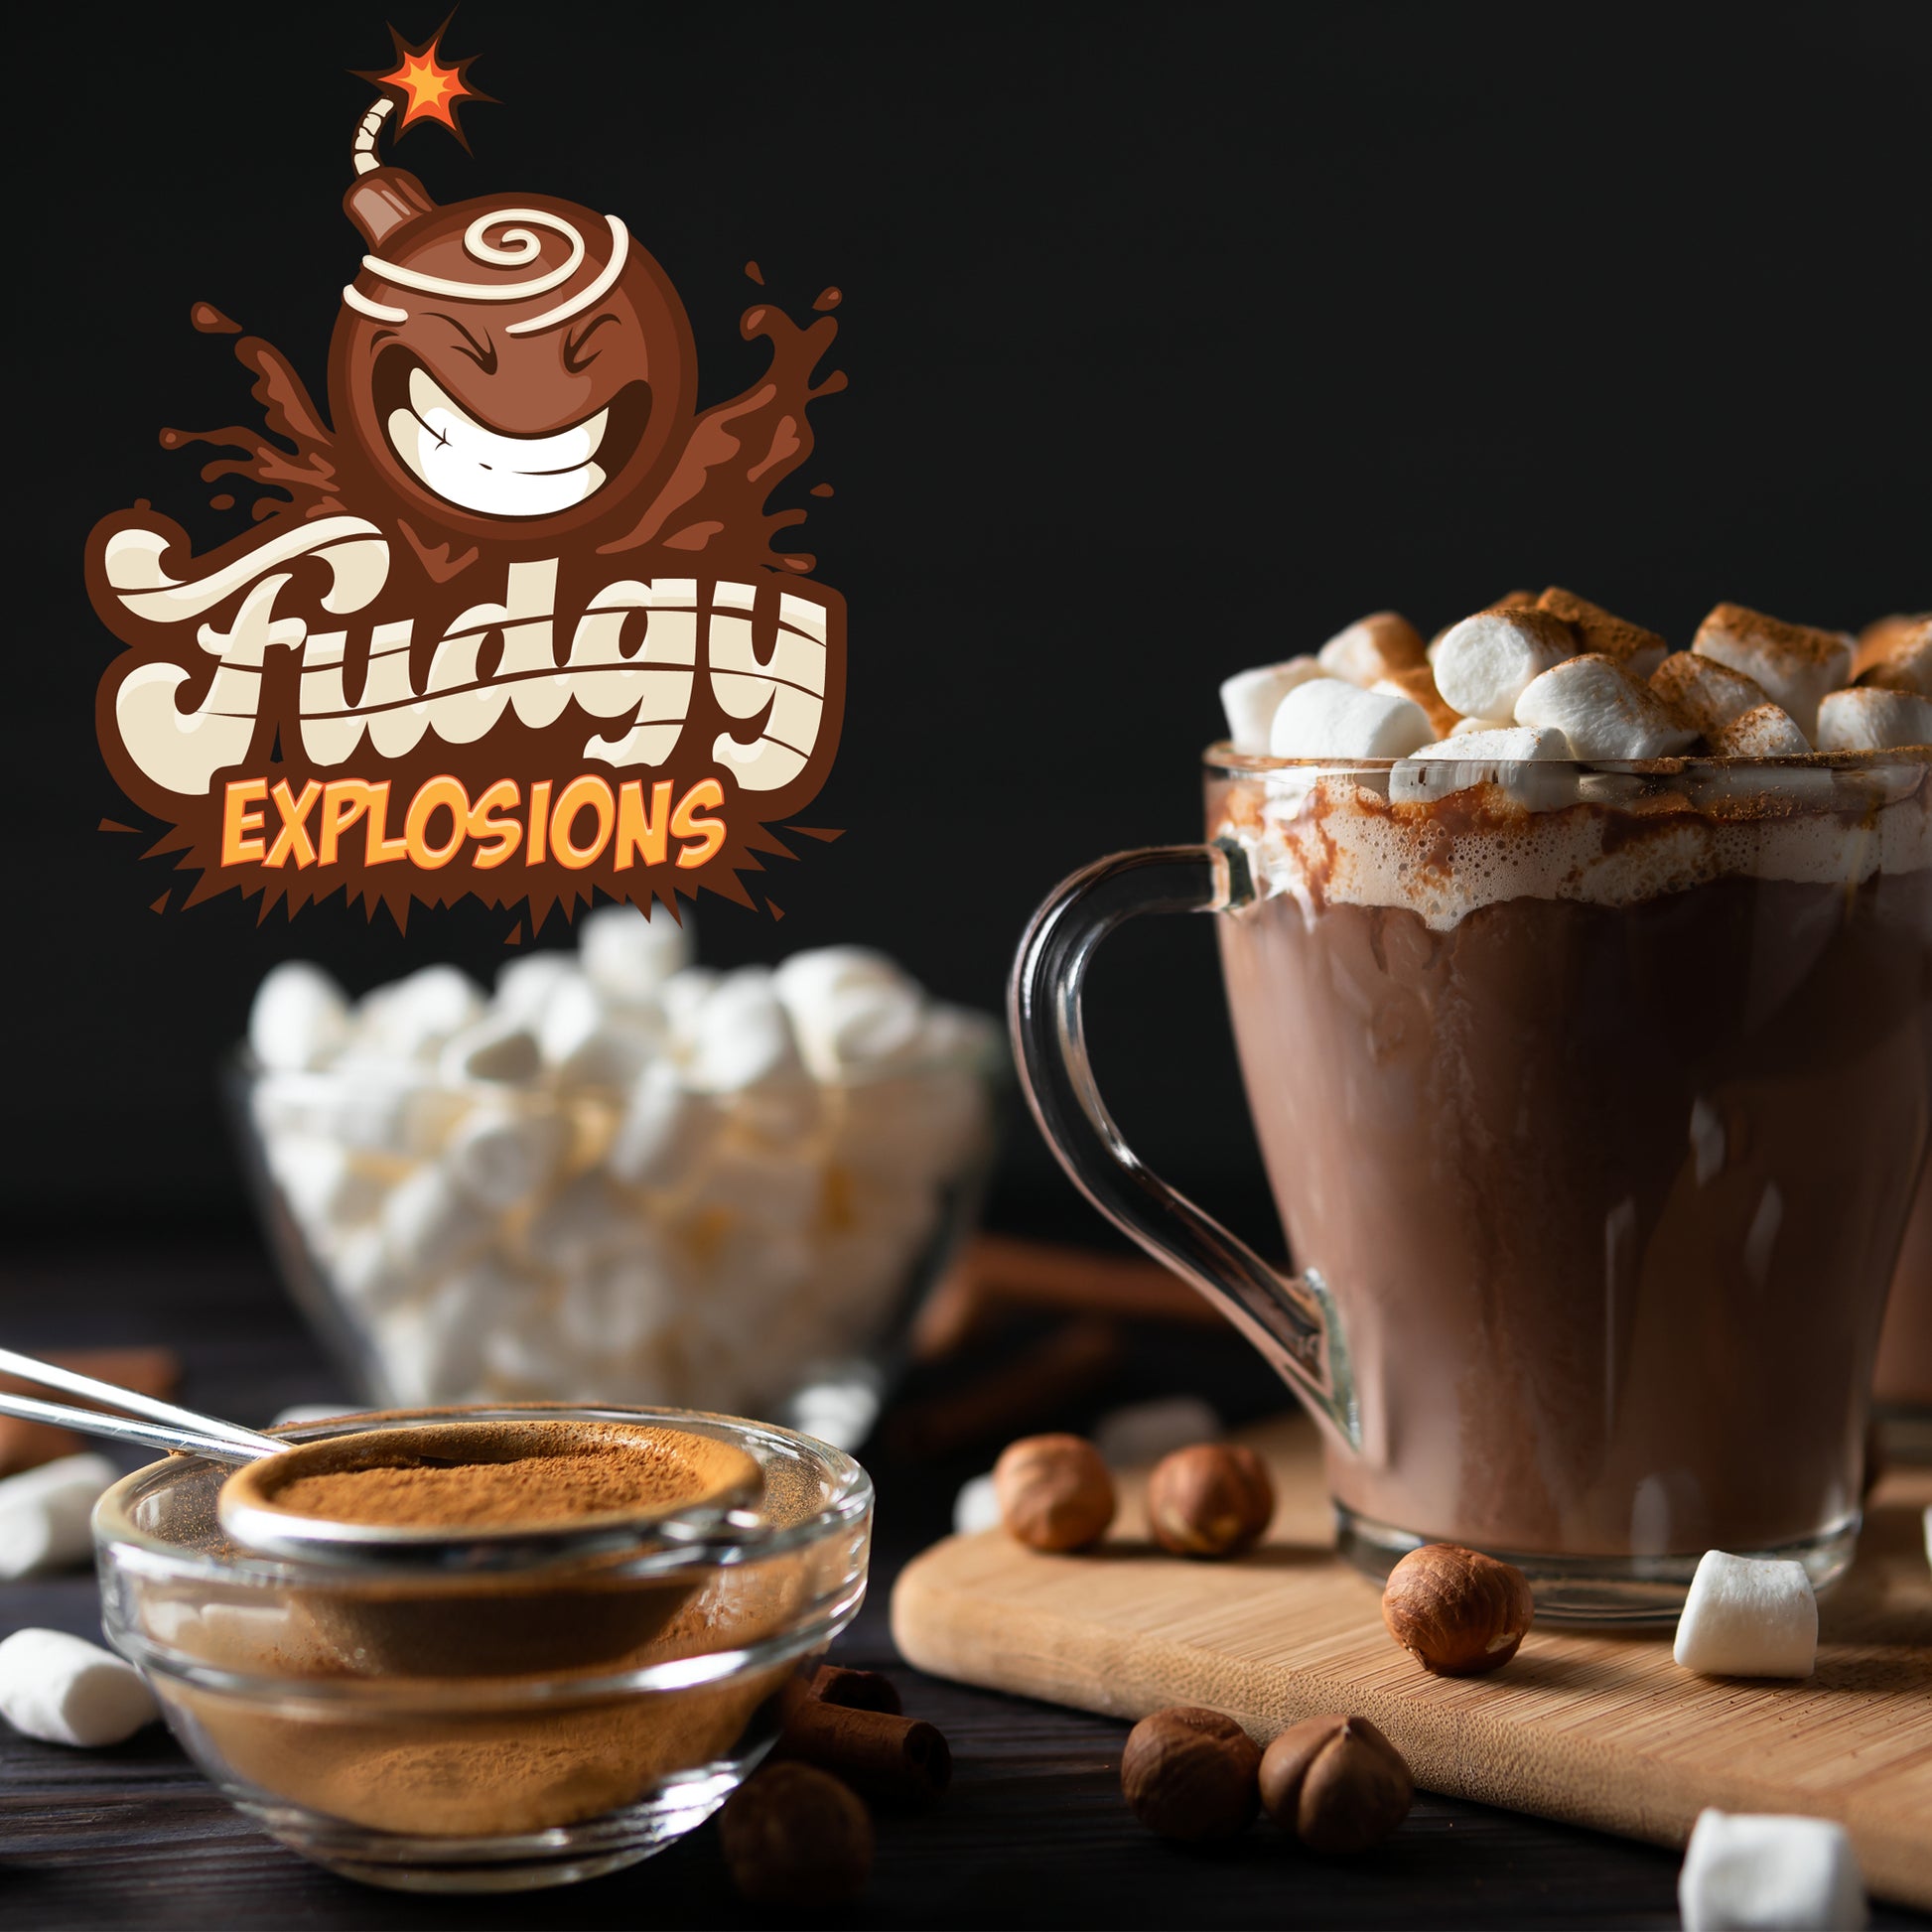 Fudgy Explosions cocoa bombs with marshmallows